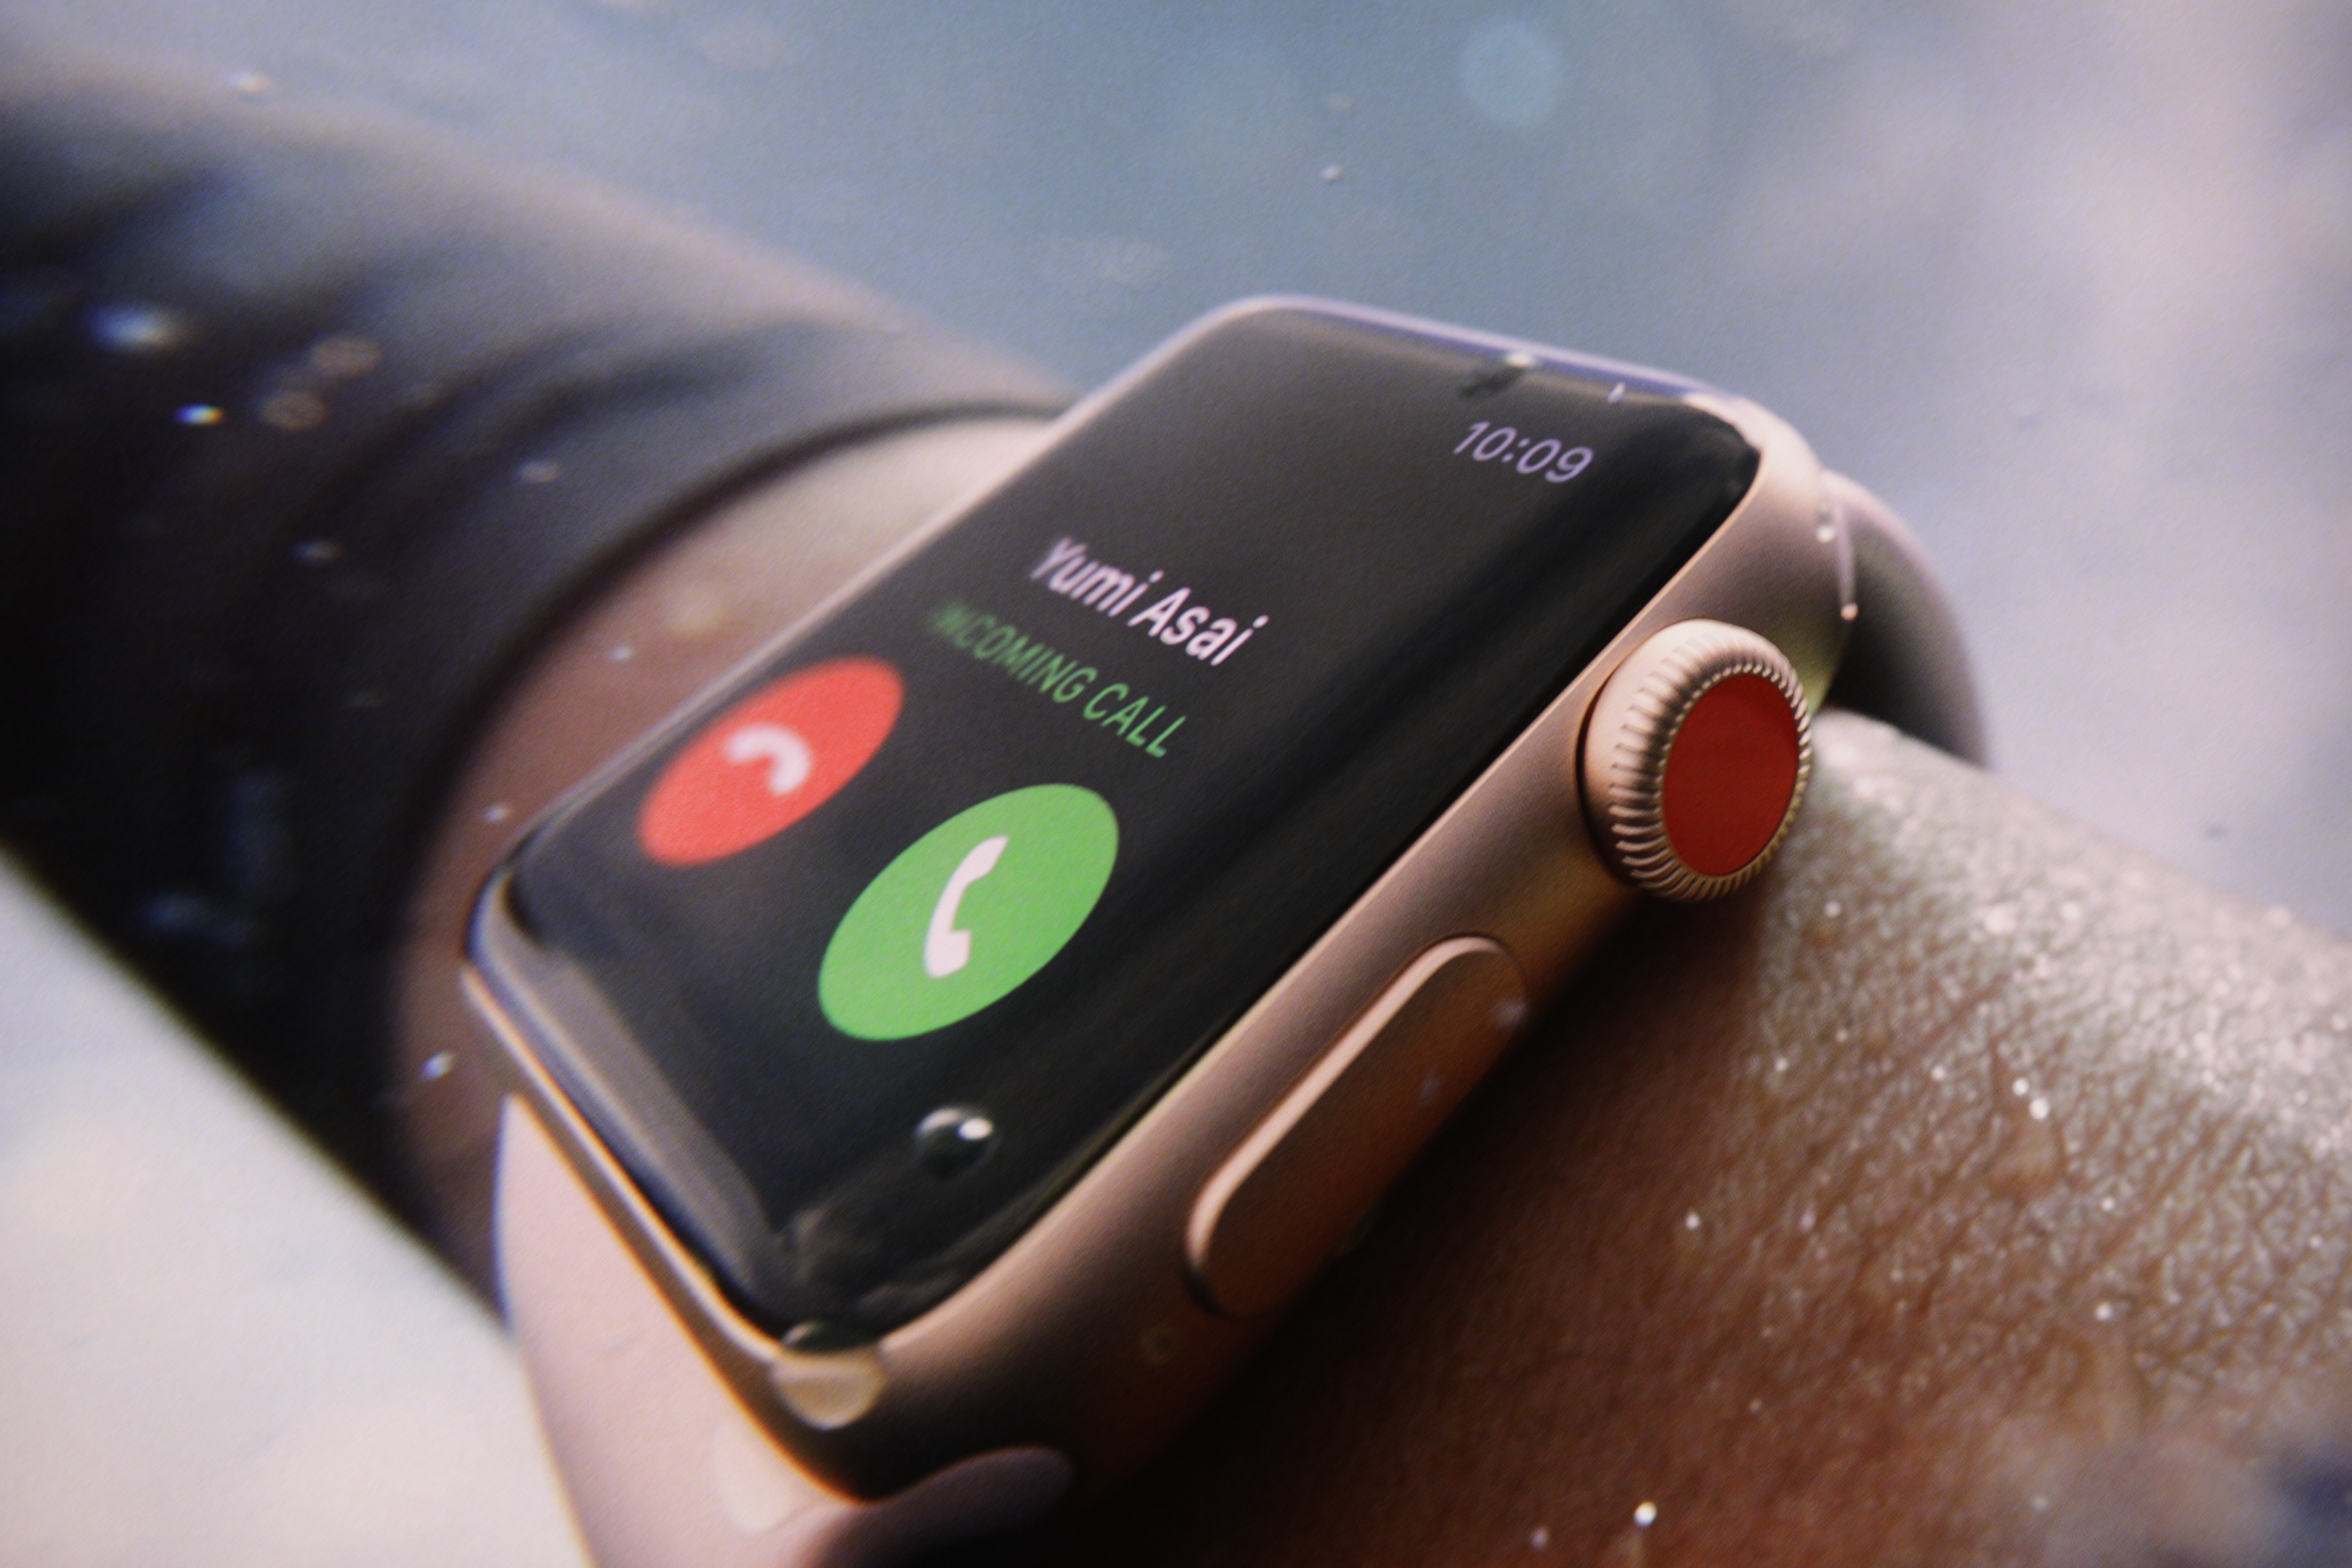 The cellular-enabled Apple Watch has the SIM built in